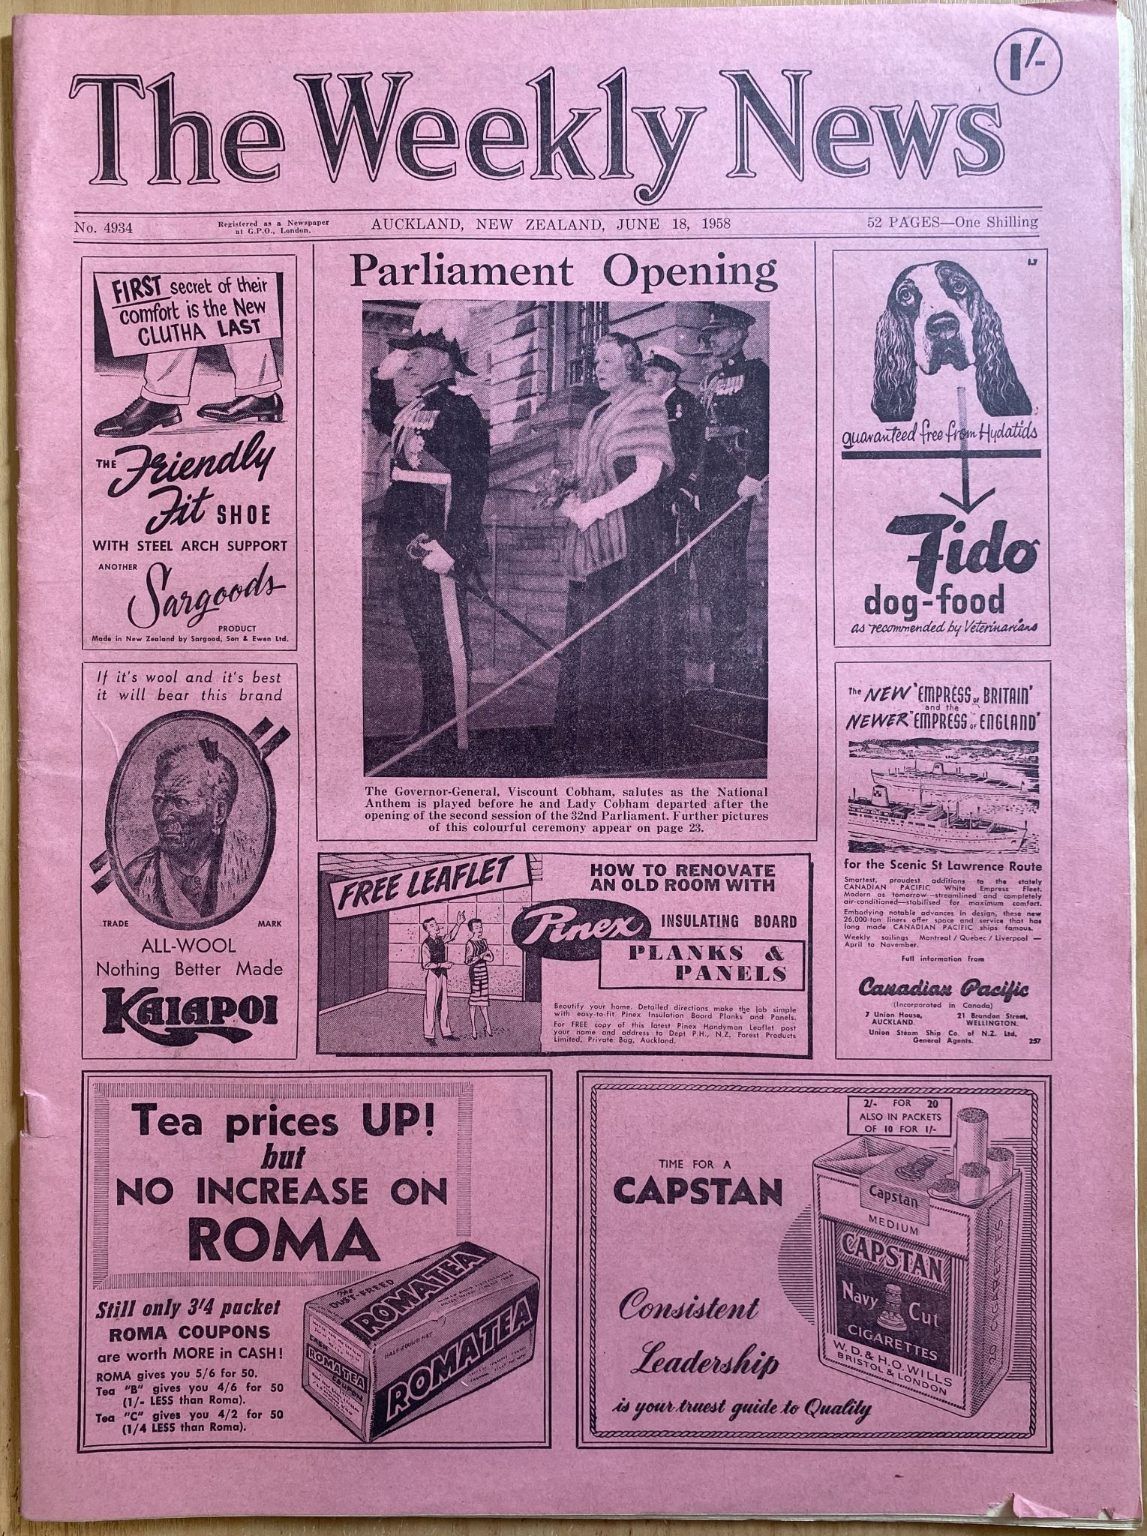 OLD NEWSPAPER: The Weekly News, No. 4934, 18 June 1958